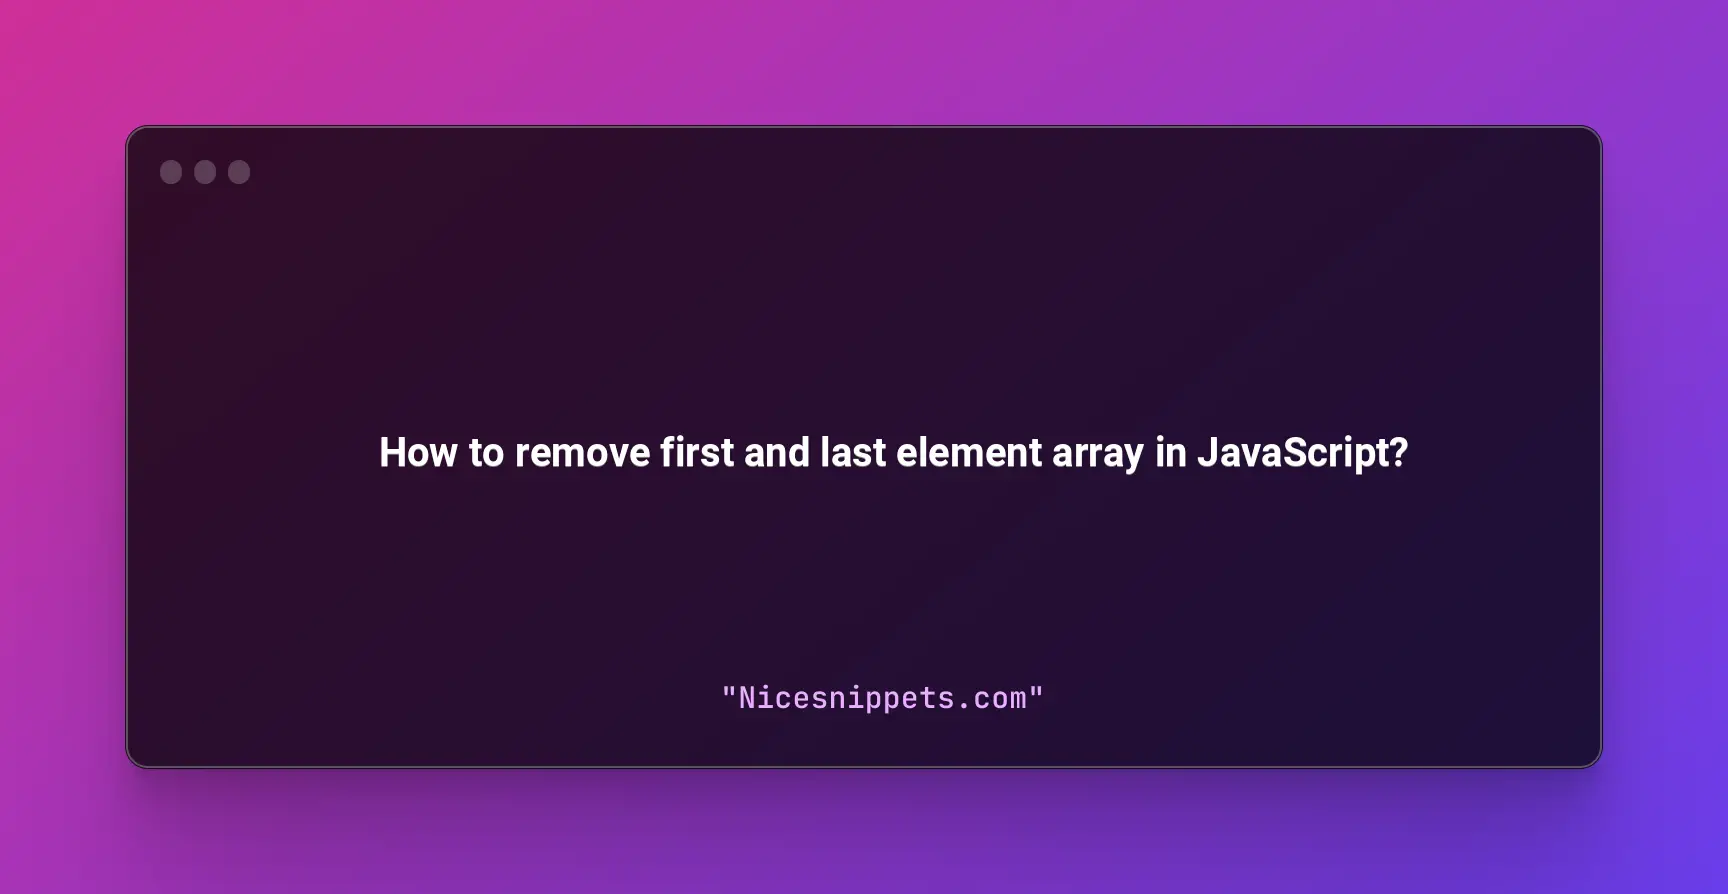 How to remove first and last element array in JavaScript?